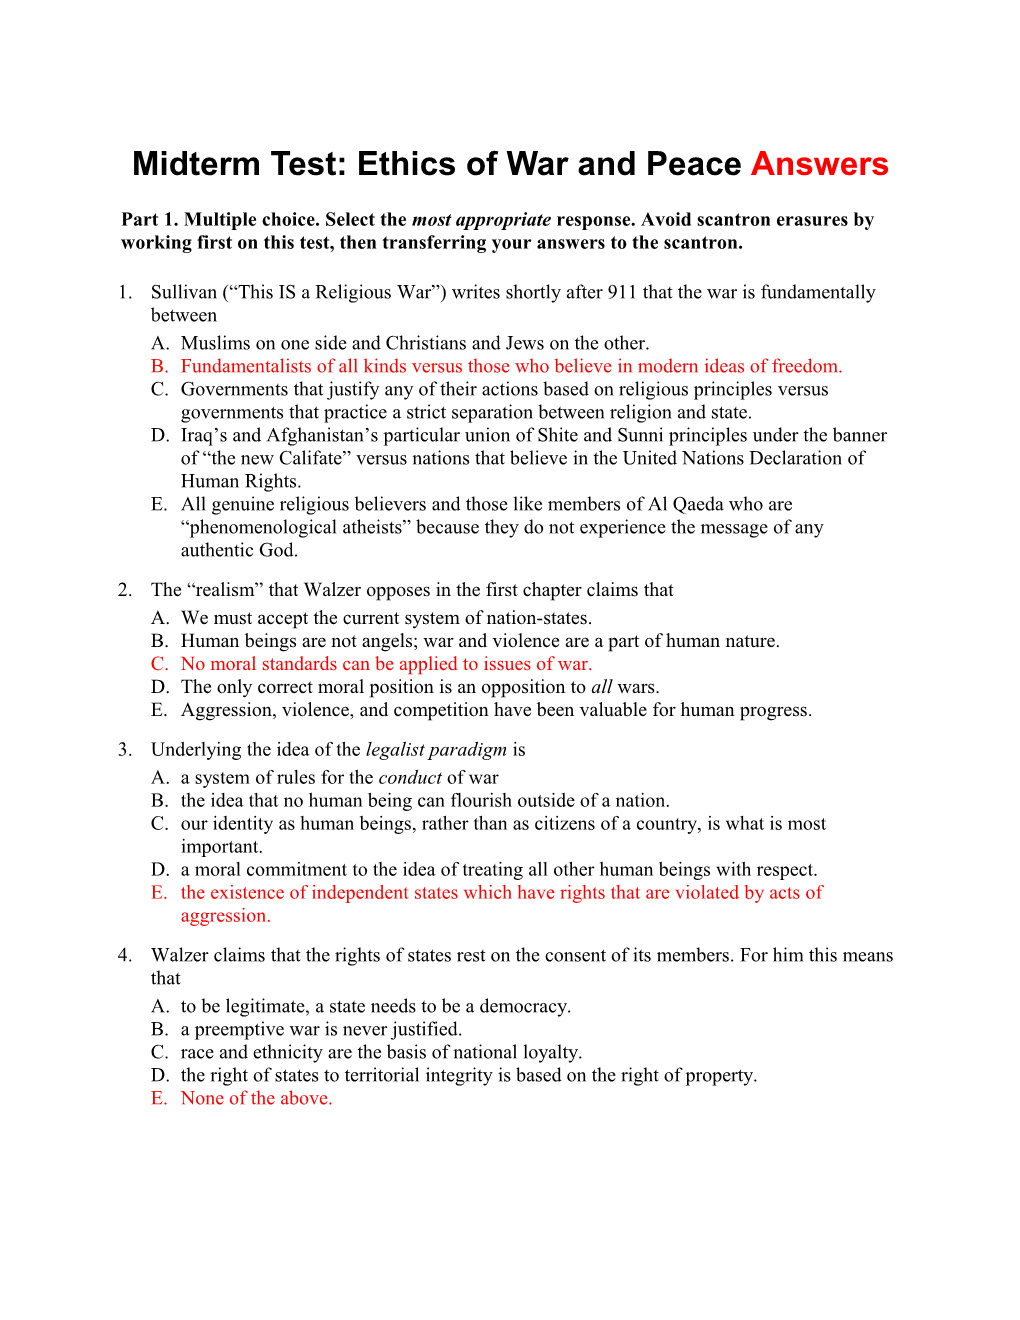 Midterm Test: Ethics of War and Peace